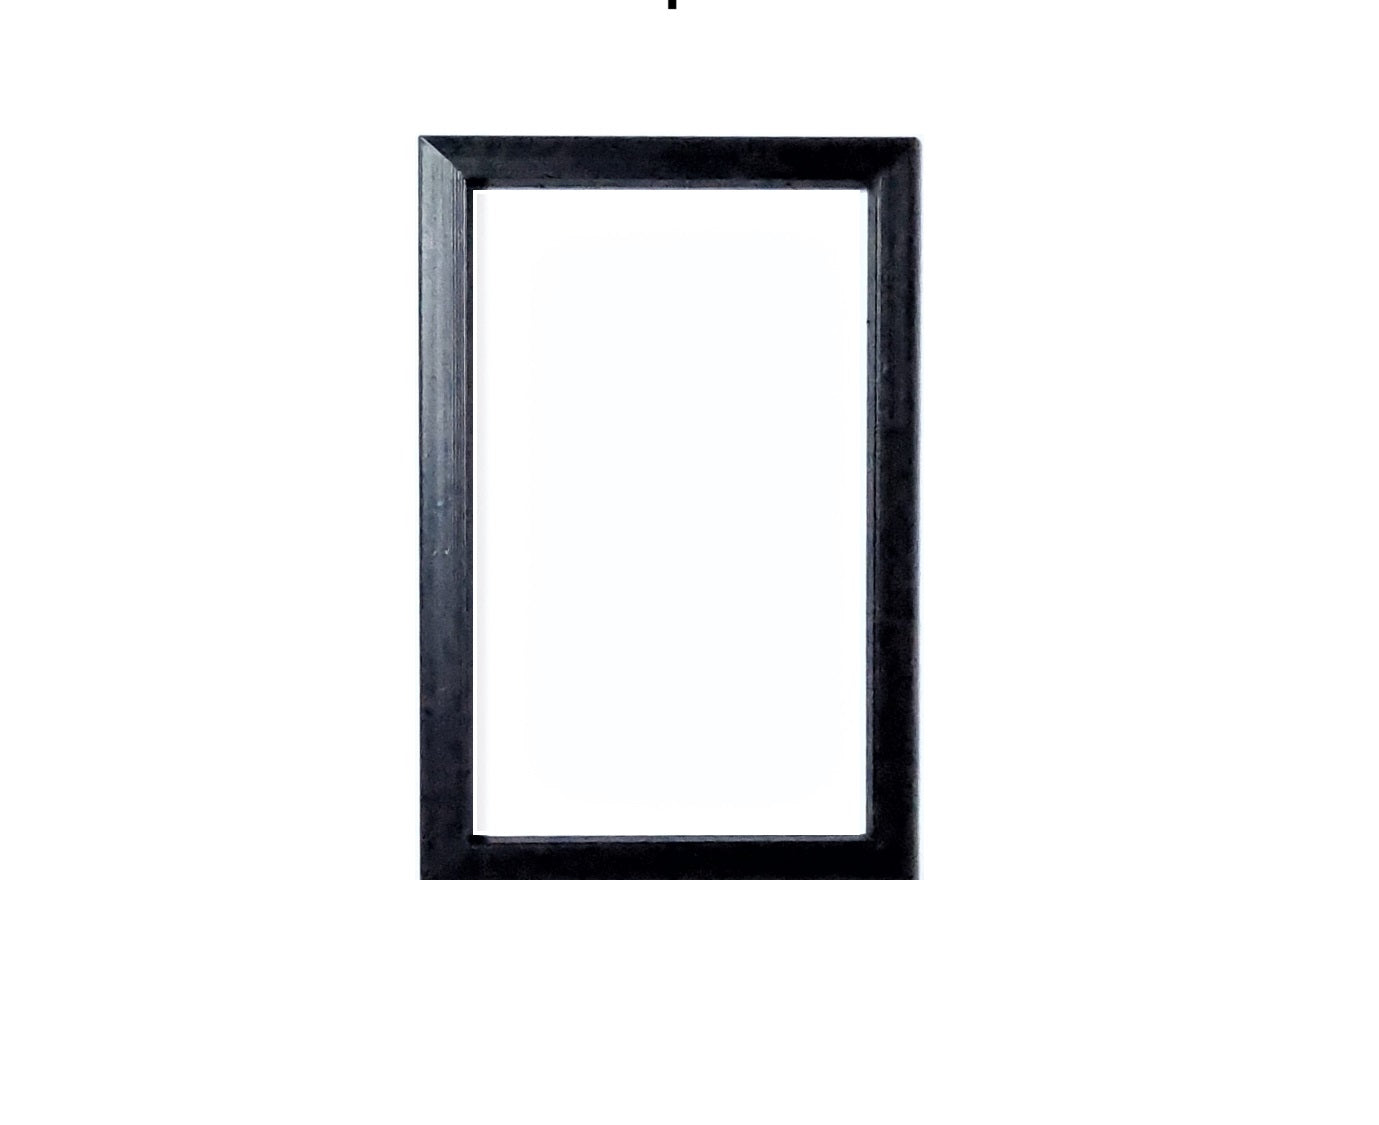 Border/Frame for Sonoff light switches (black) 3D printed - Elite Renewable Solutions